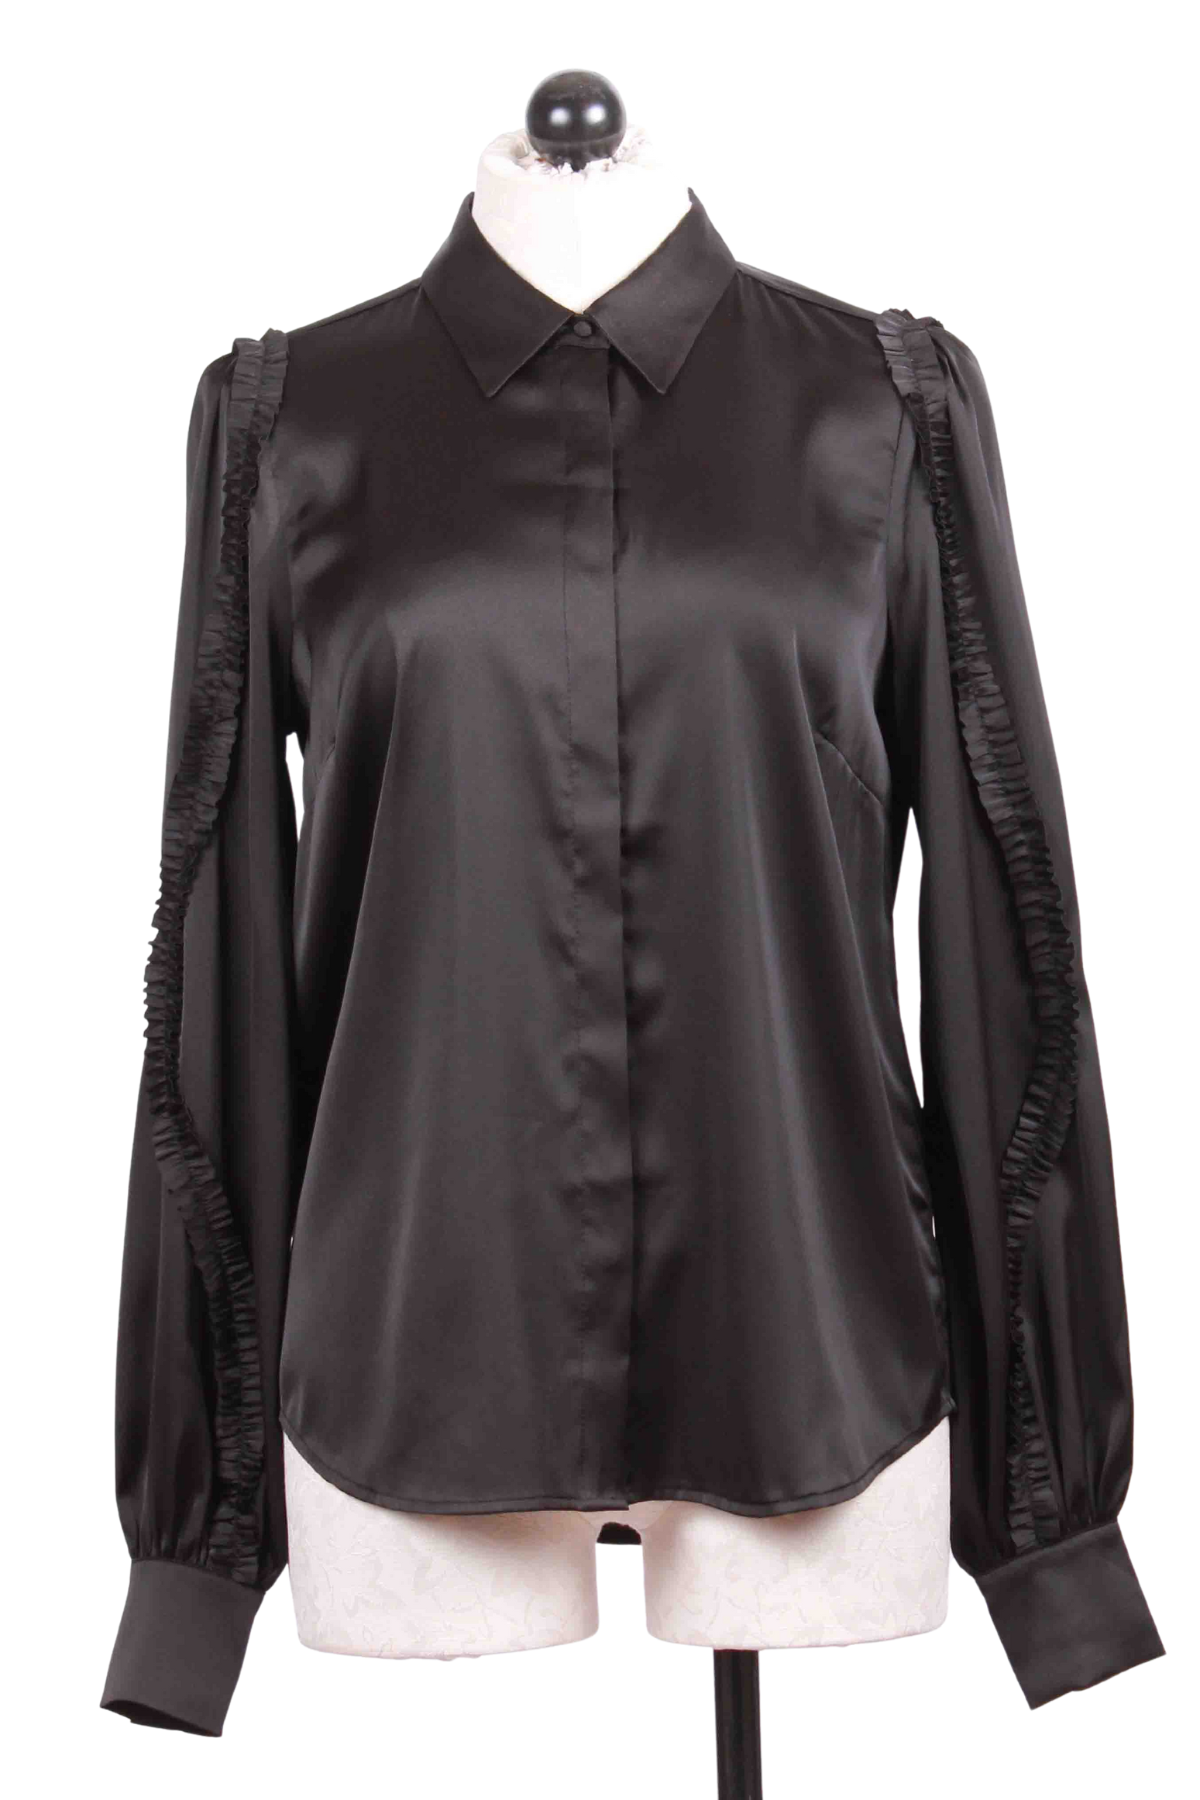 black Chandler Blouse by Generation Love